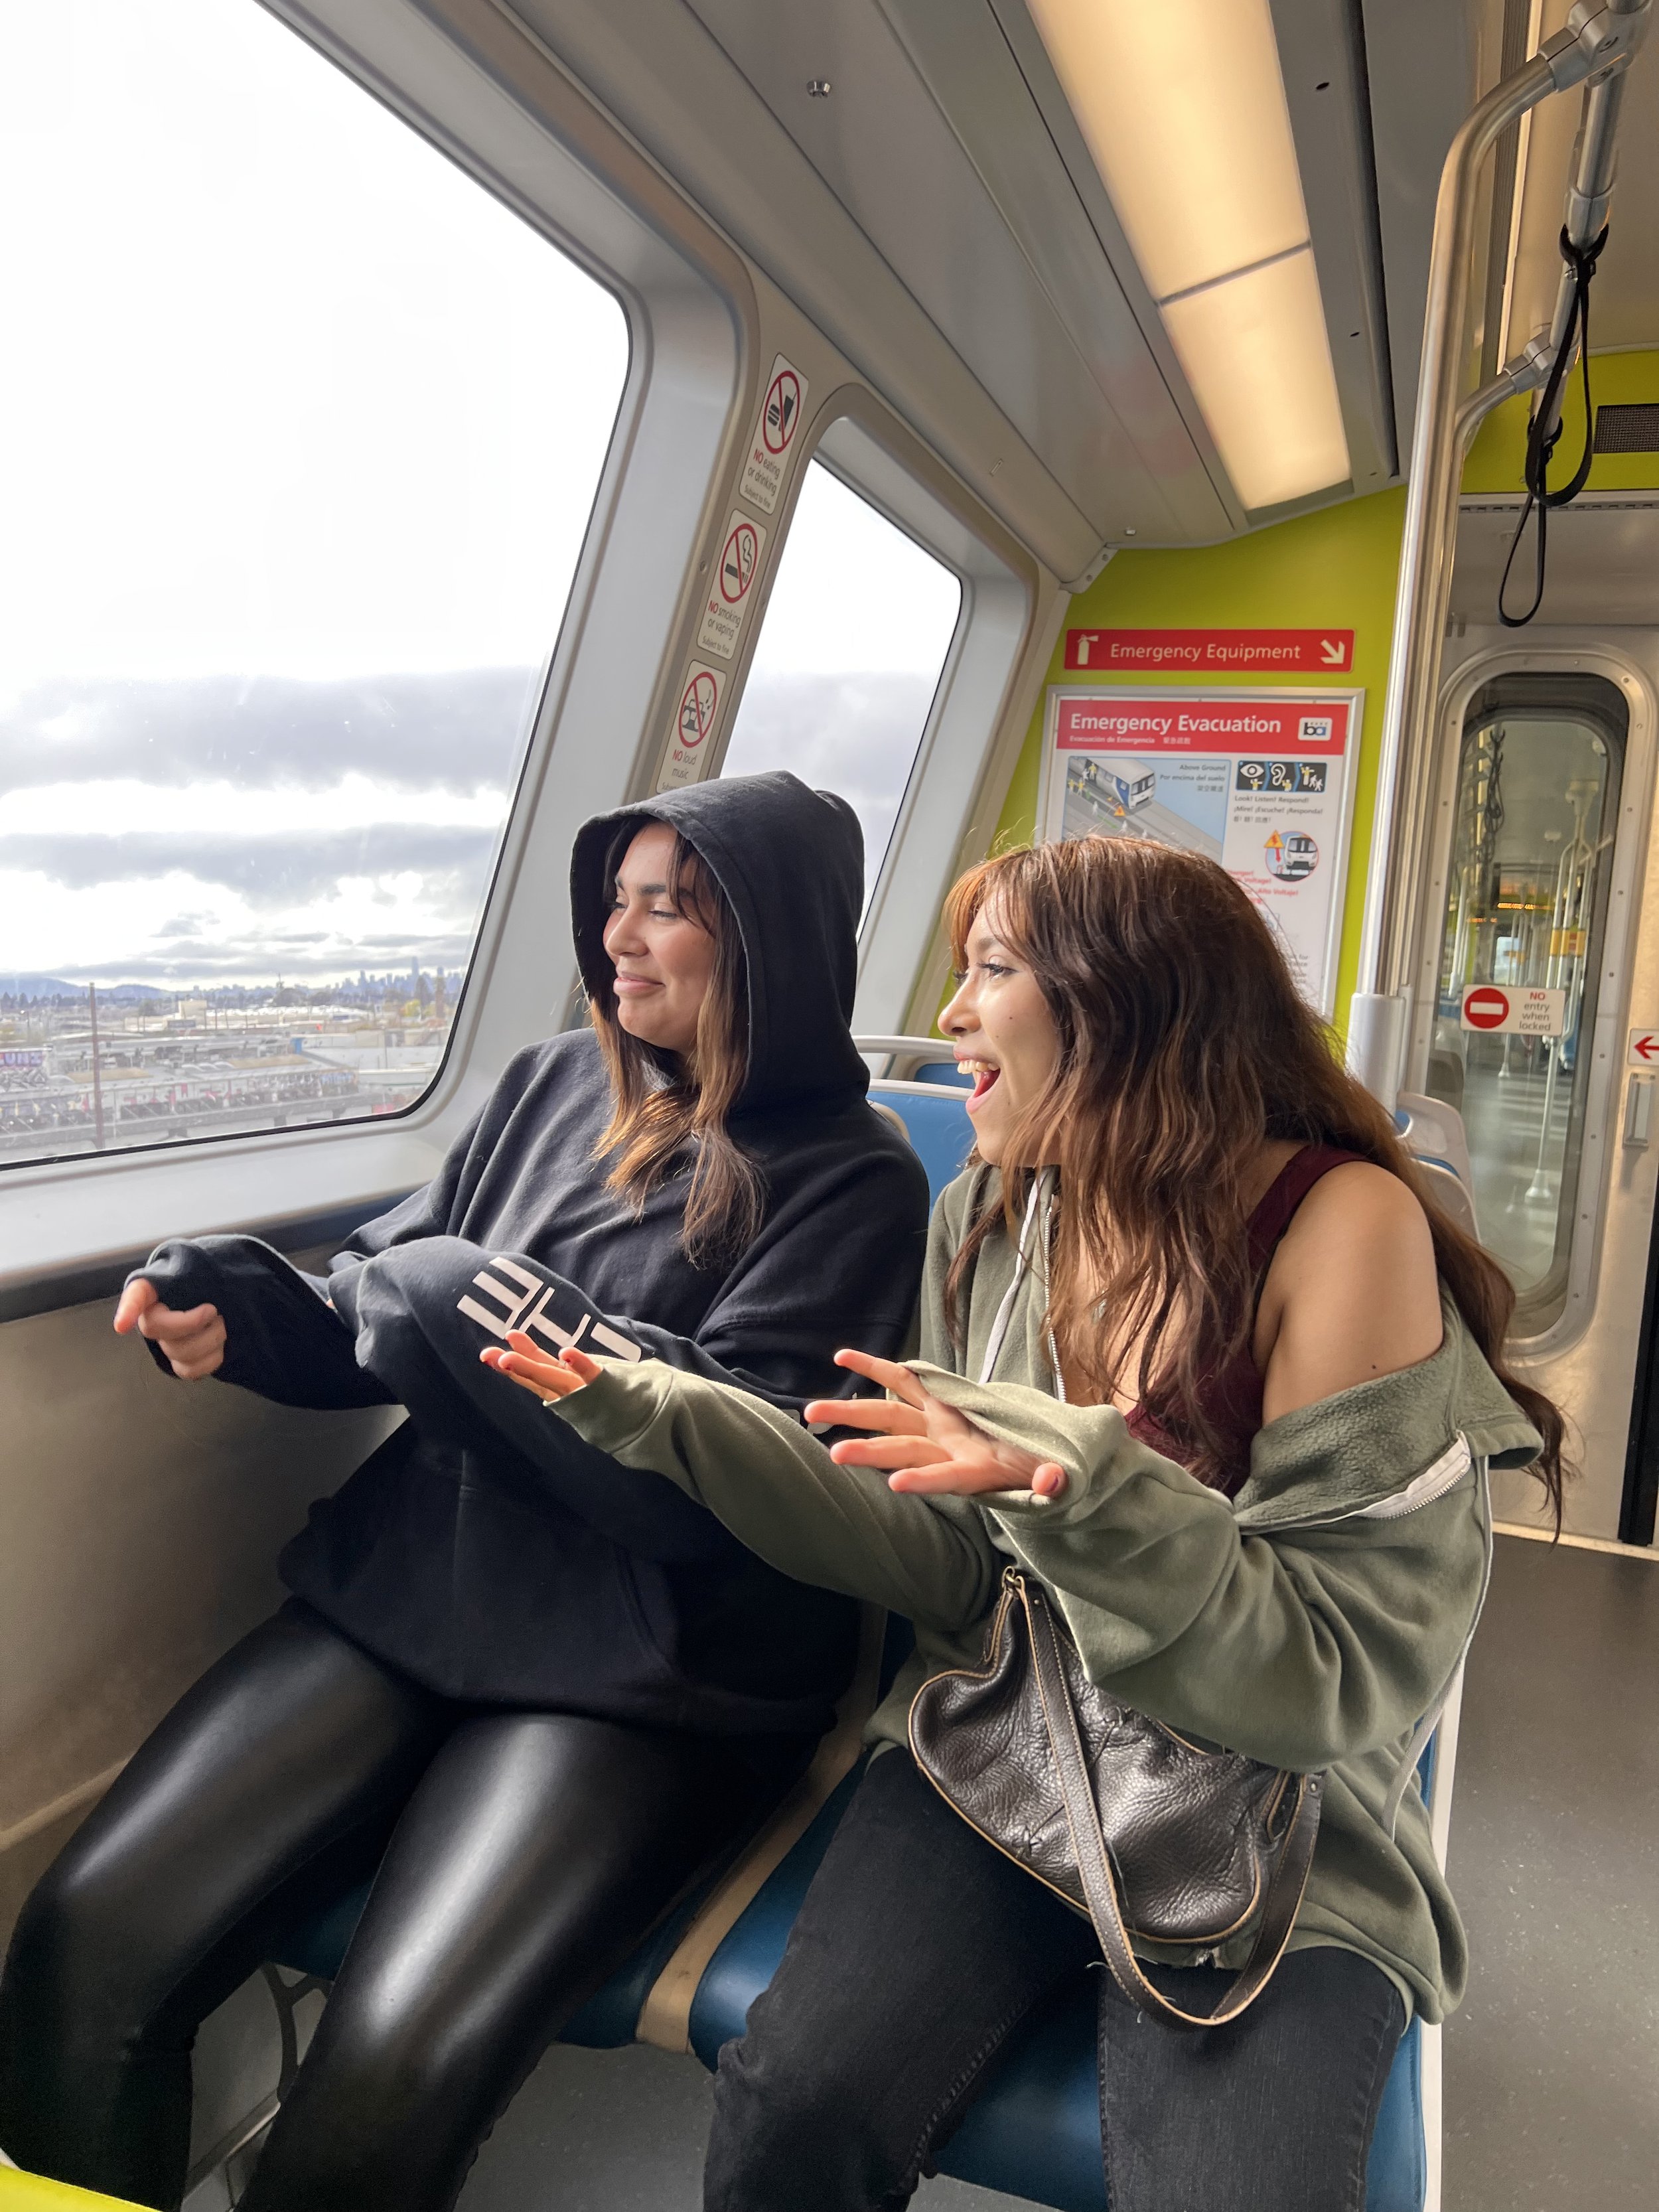  Two youths are laughing, seated on a BART Train 